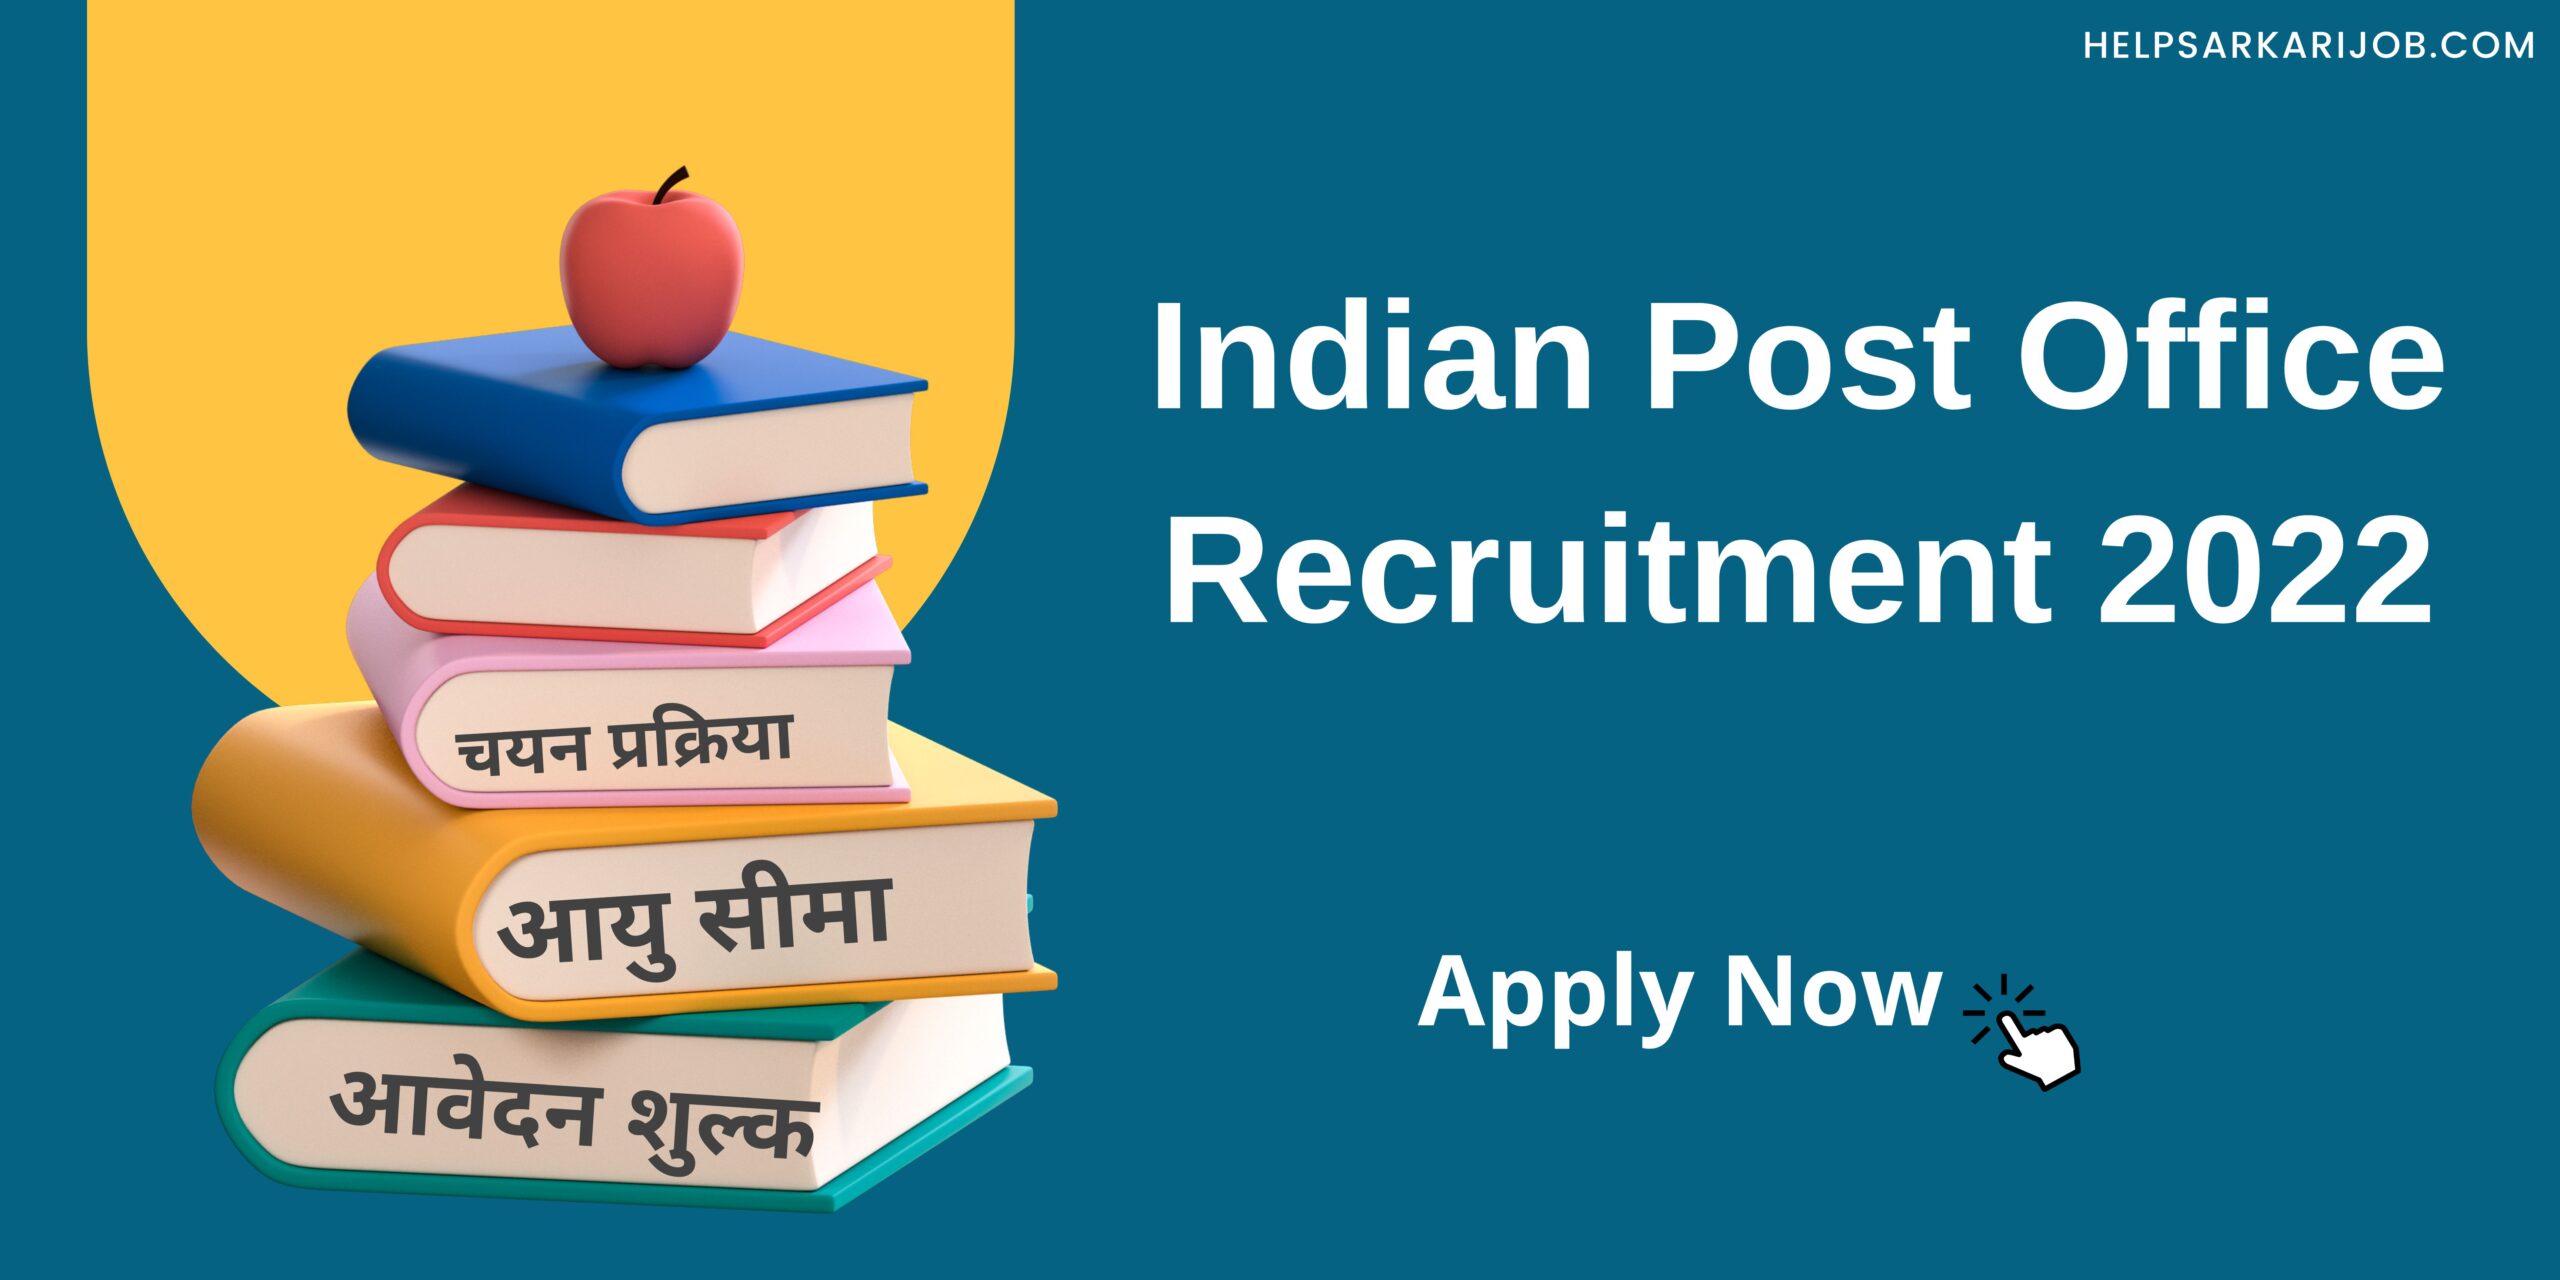 Indian Post Office Recruitment 2022 scaled -